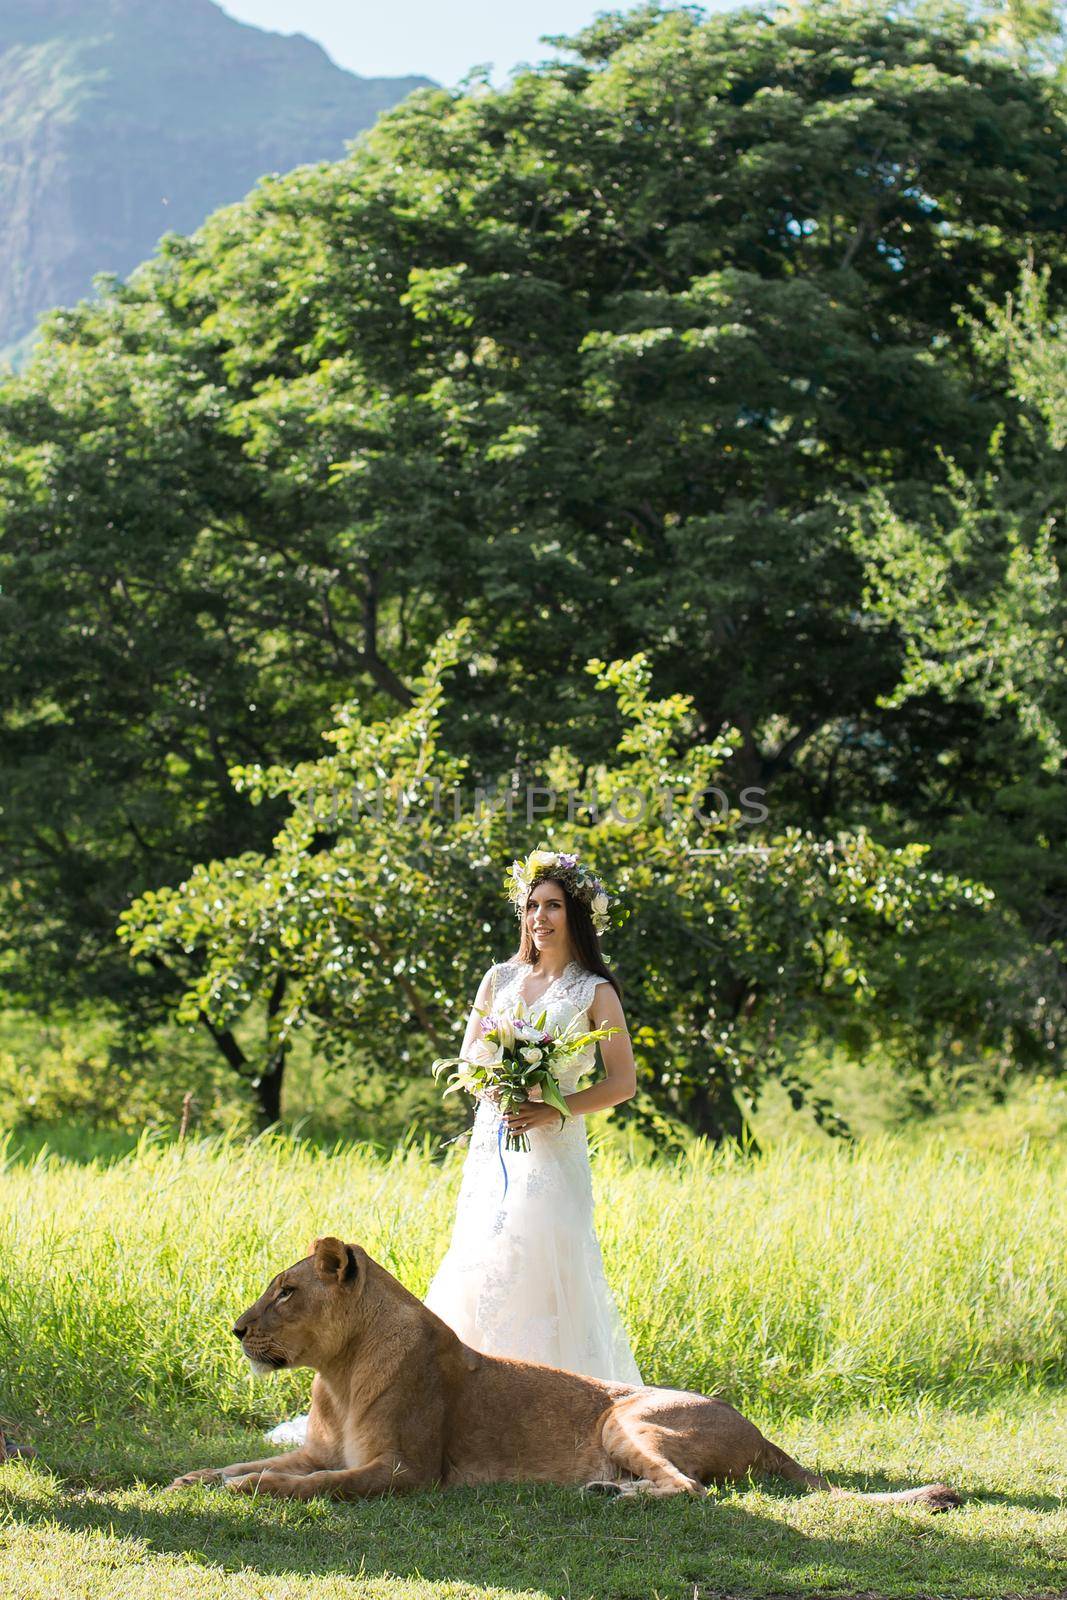 Beautiful bride and a lioness in the picturesque nature